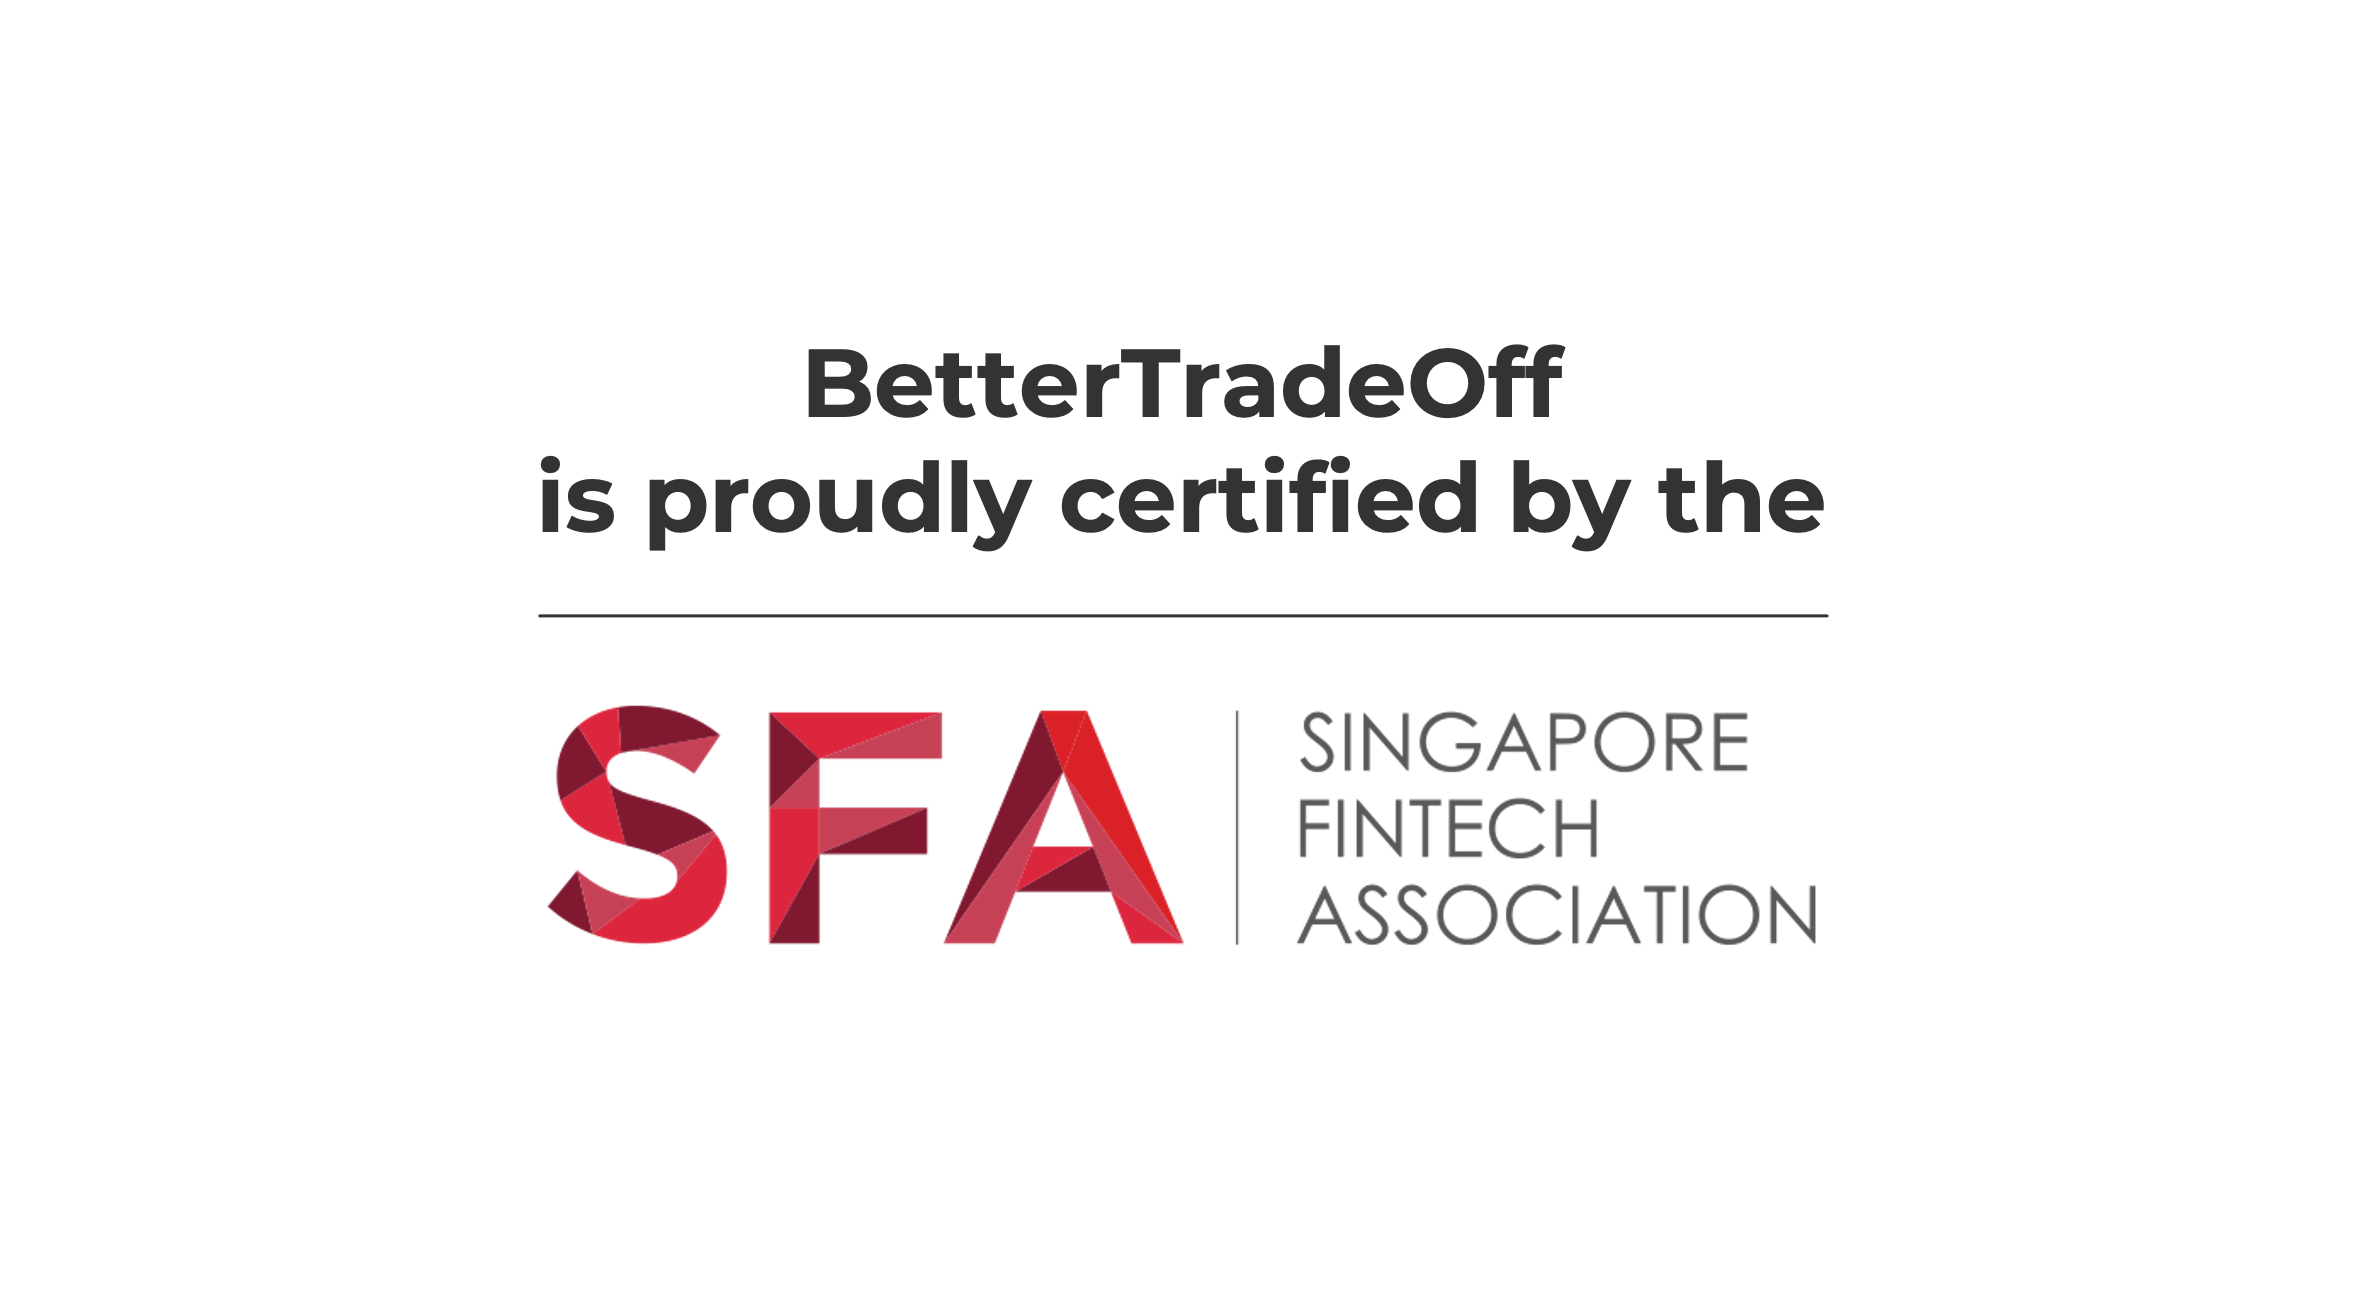 BTO is proudly certified by the SAF